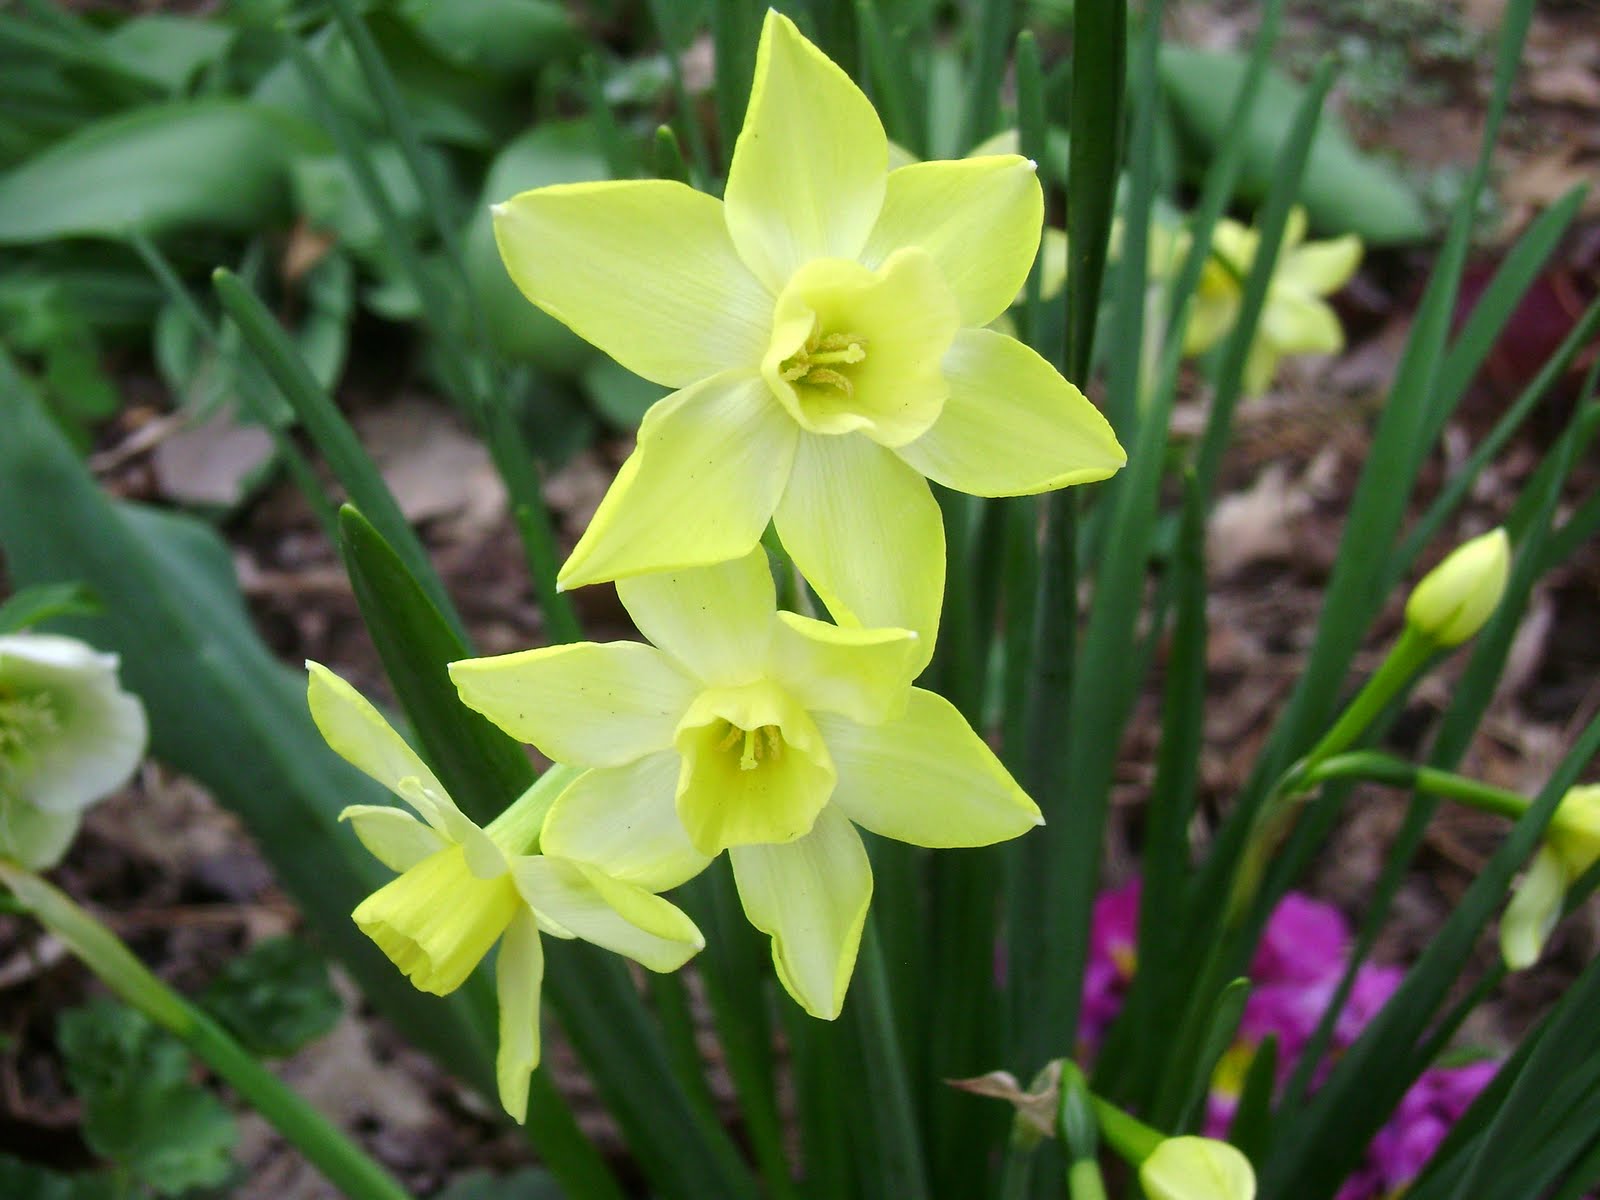 In the shade garden, slender narcissus have just begun to bloom. I 